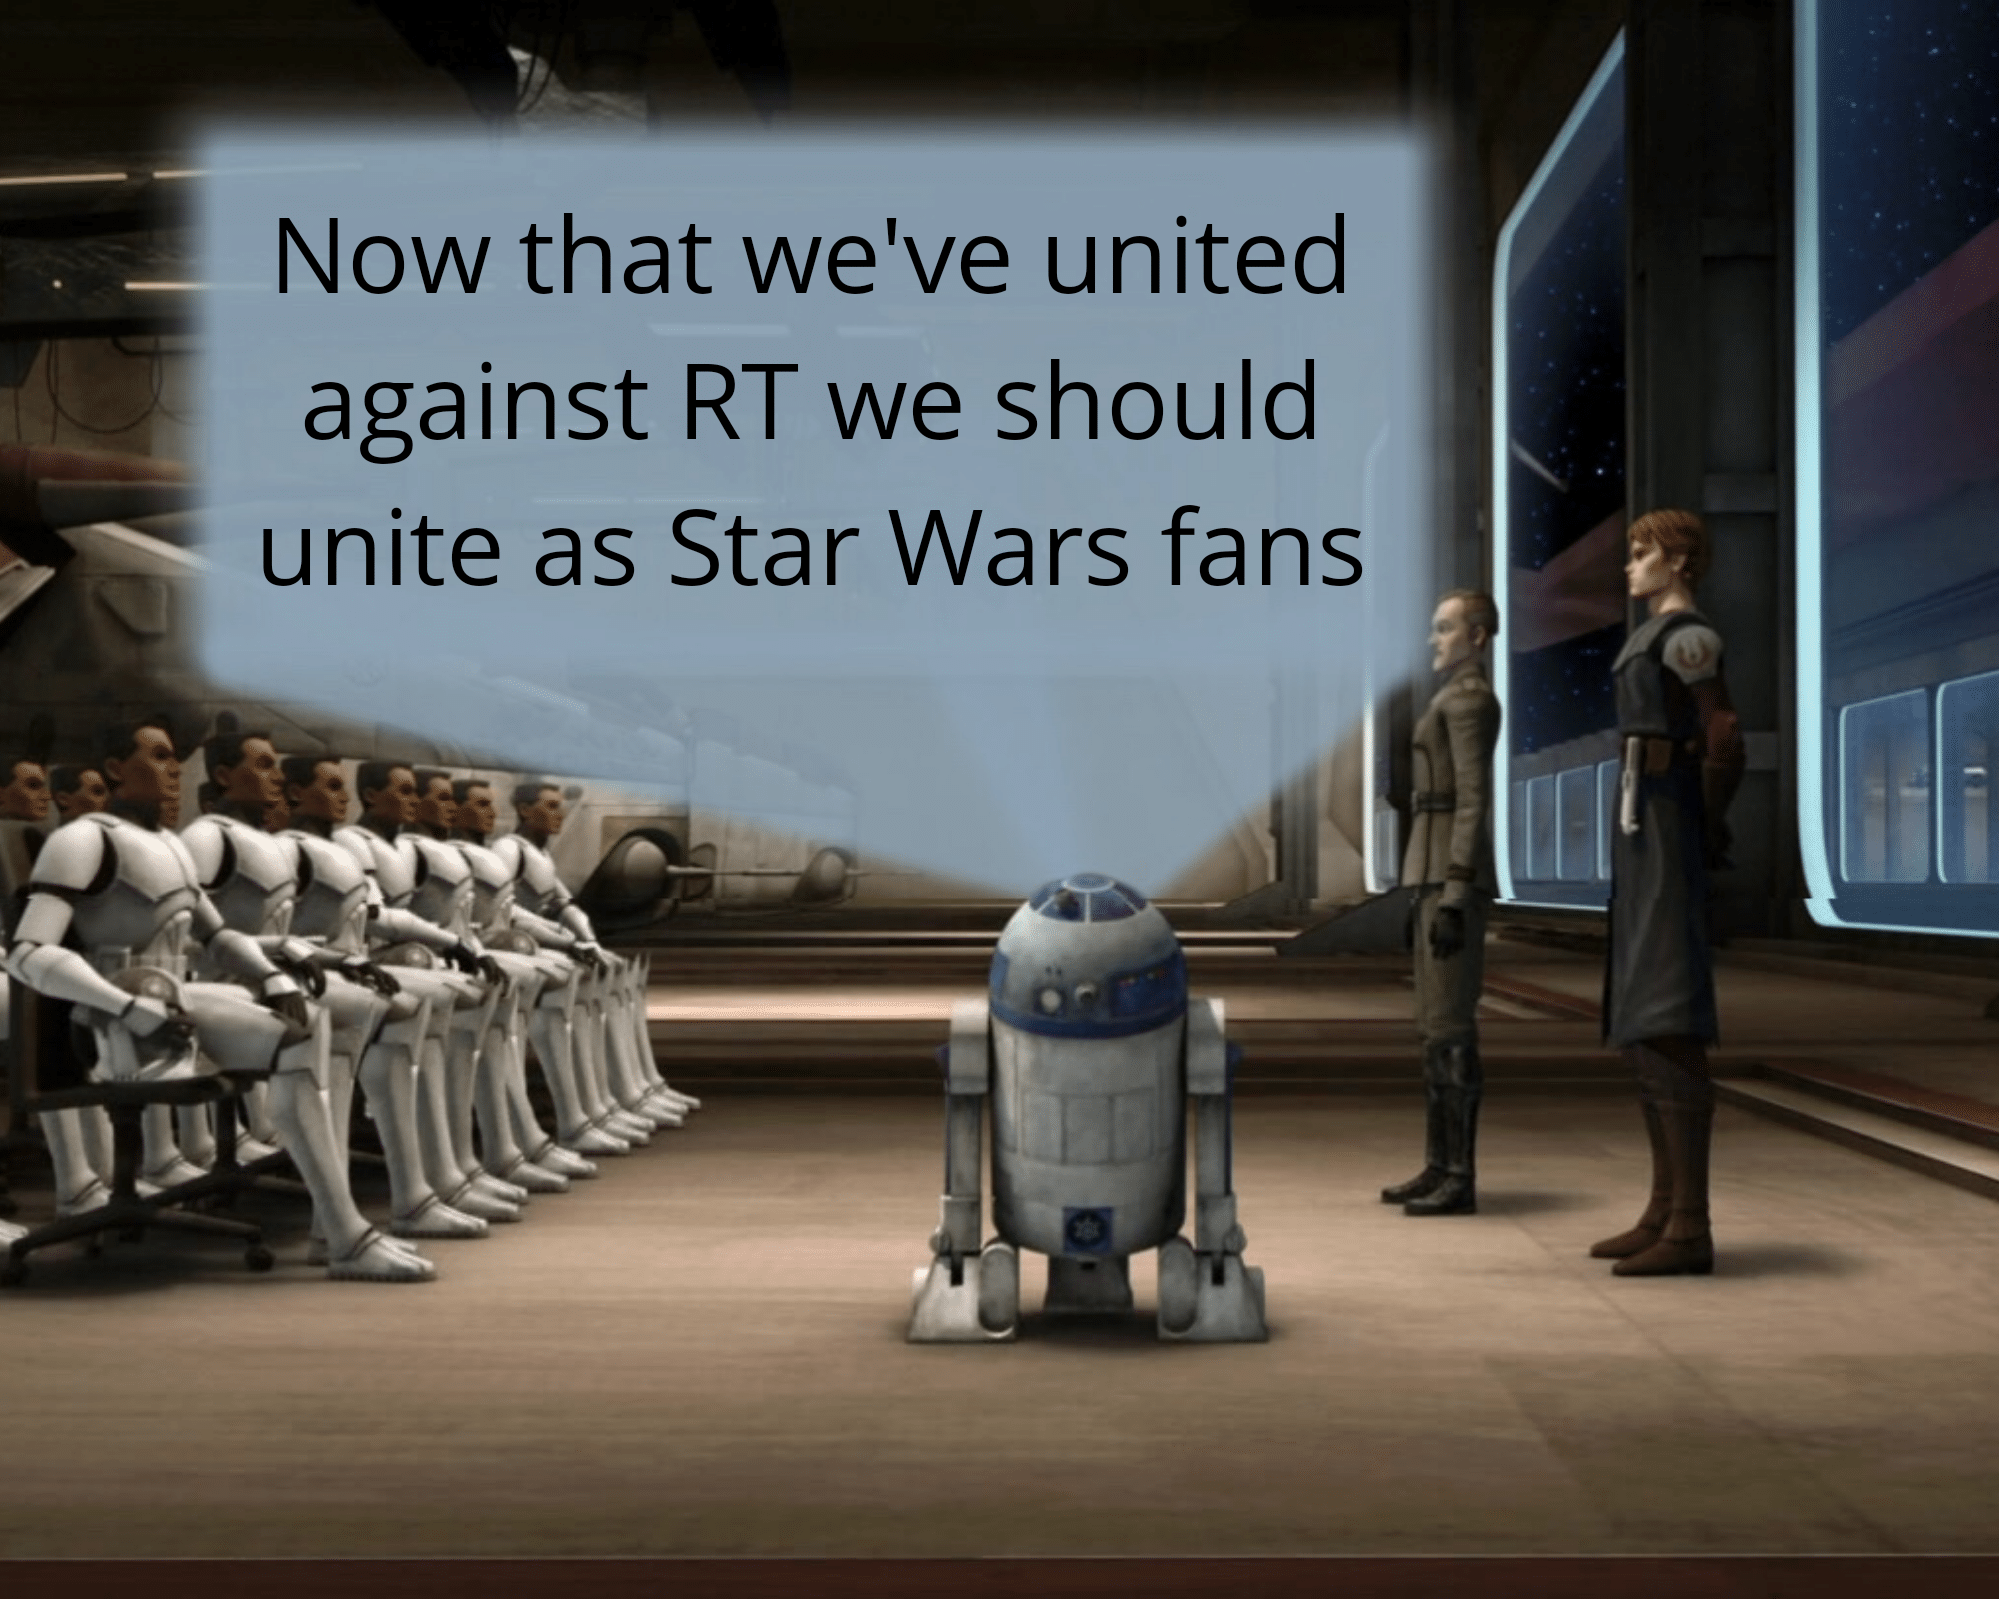 Ot-memes, Star Wars, Disney, Tomatoes, ROTS, TAR WARS Star Wars Memes Ot-memes, Star Wars, Disney, Tomatoes, ROTS, TAR WARS text: Now that we've united against RT we should unite as Star Wars fans 